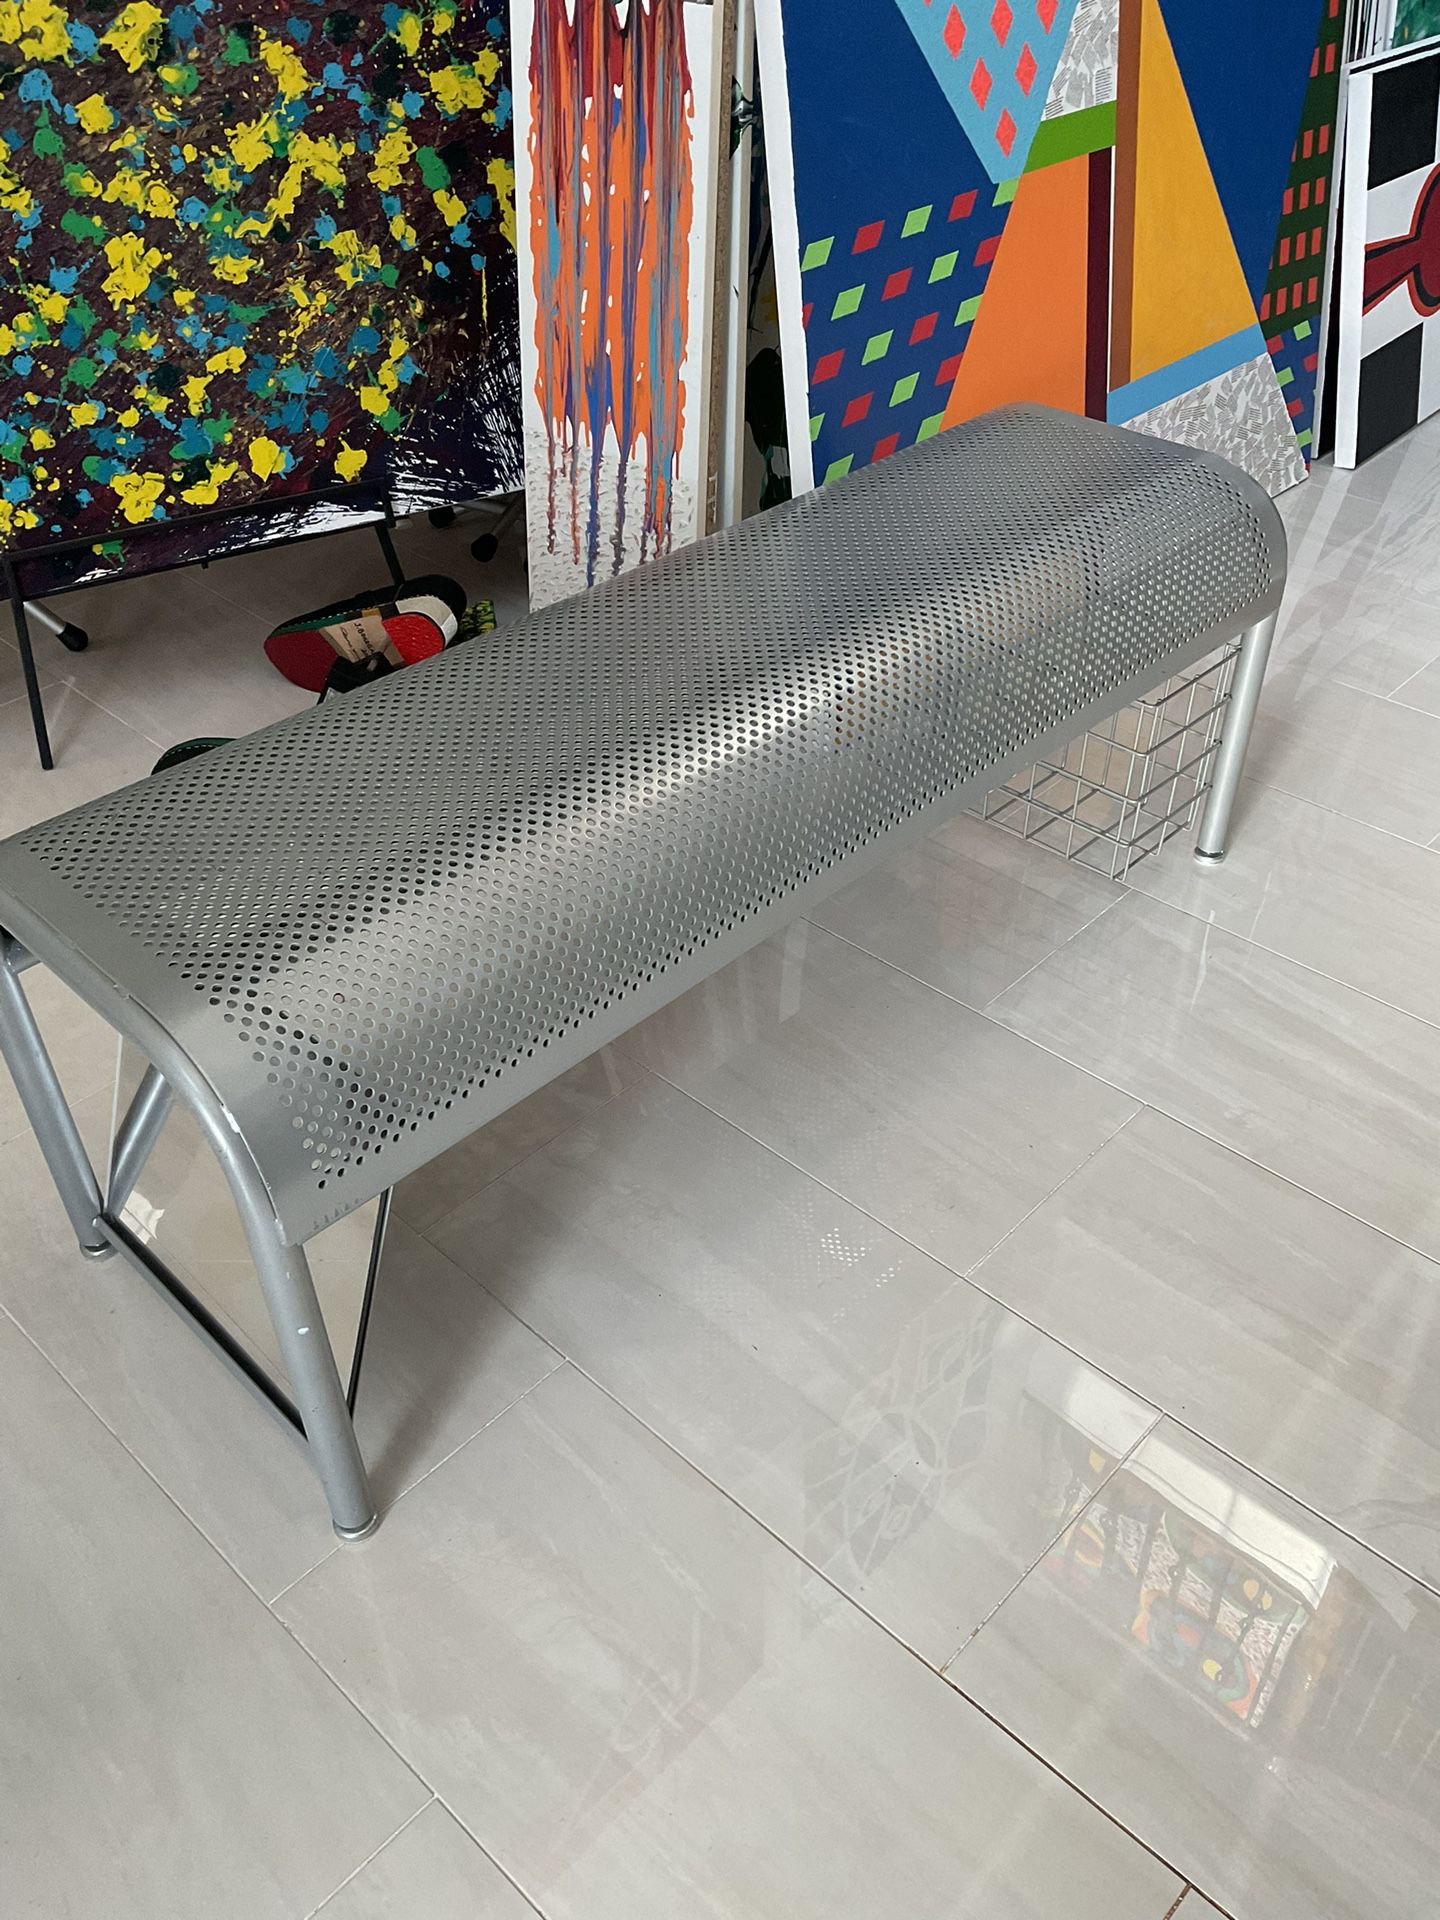 Long Metal Silver Benches